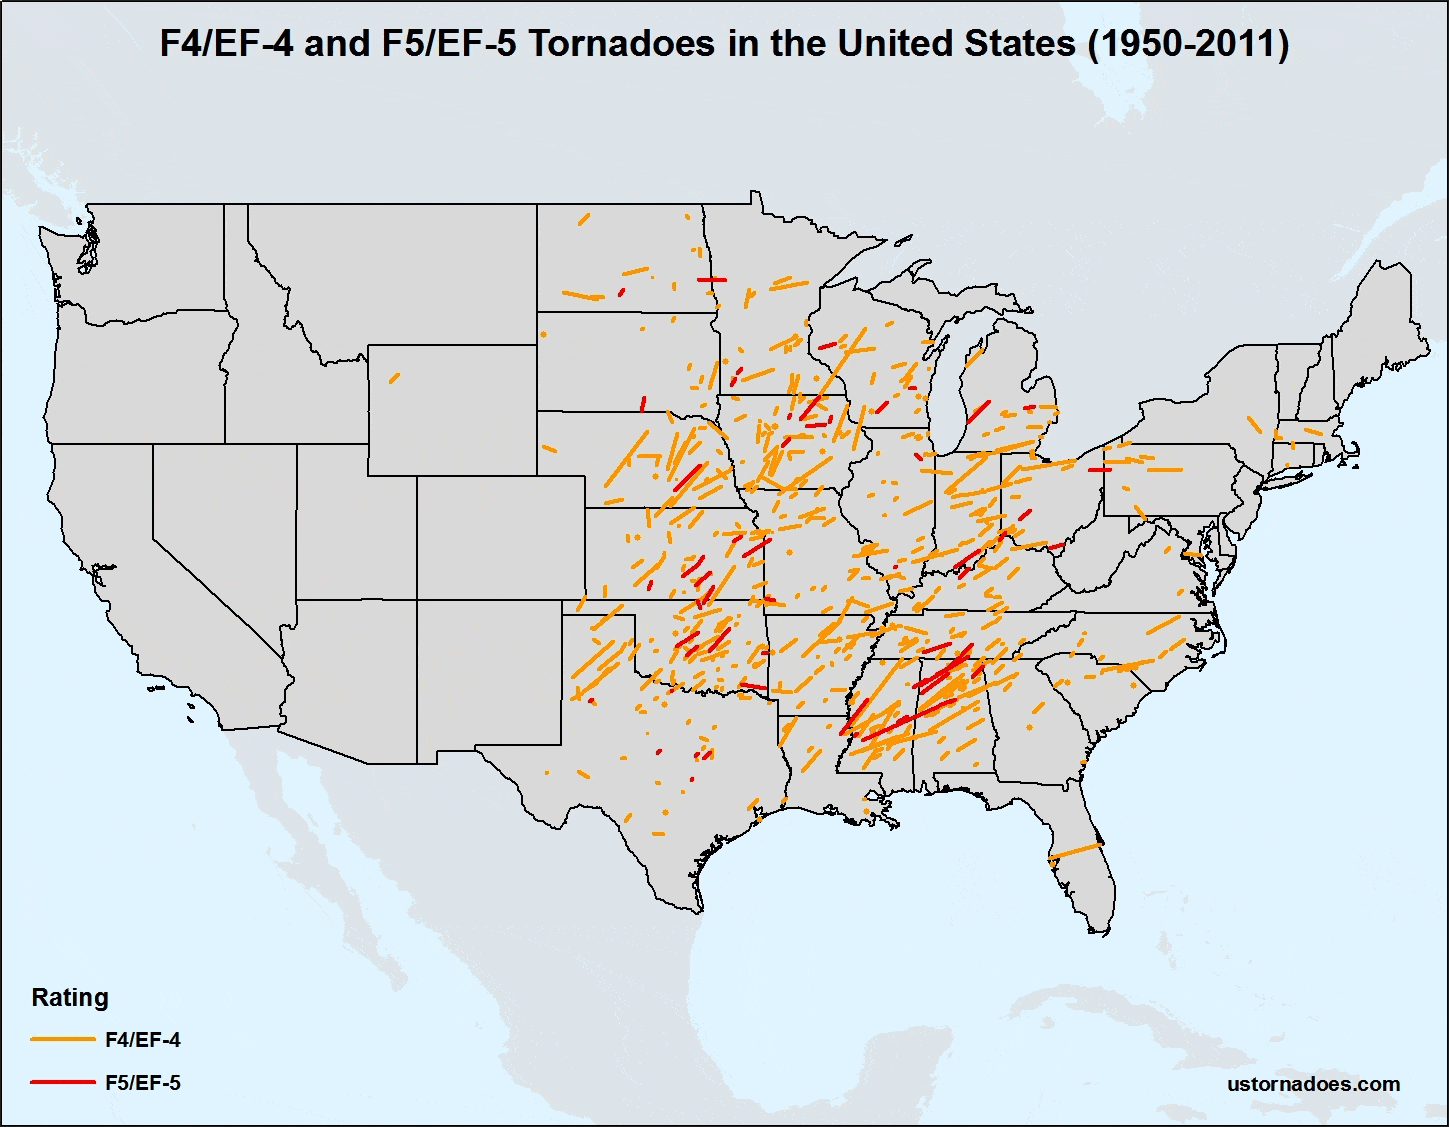 violent-tornadoes-f4-ef4-and-f5-ef5-in-the-united-states.gif